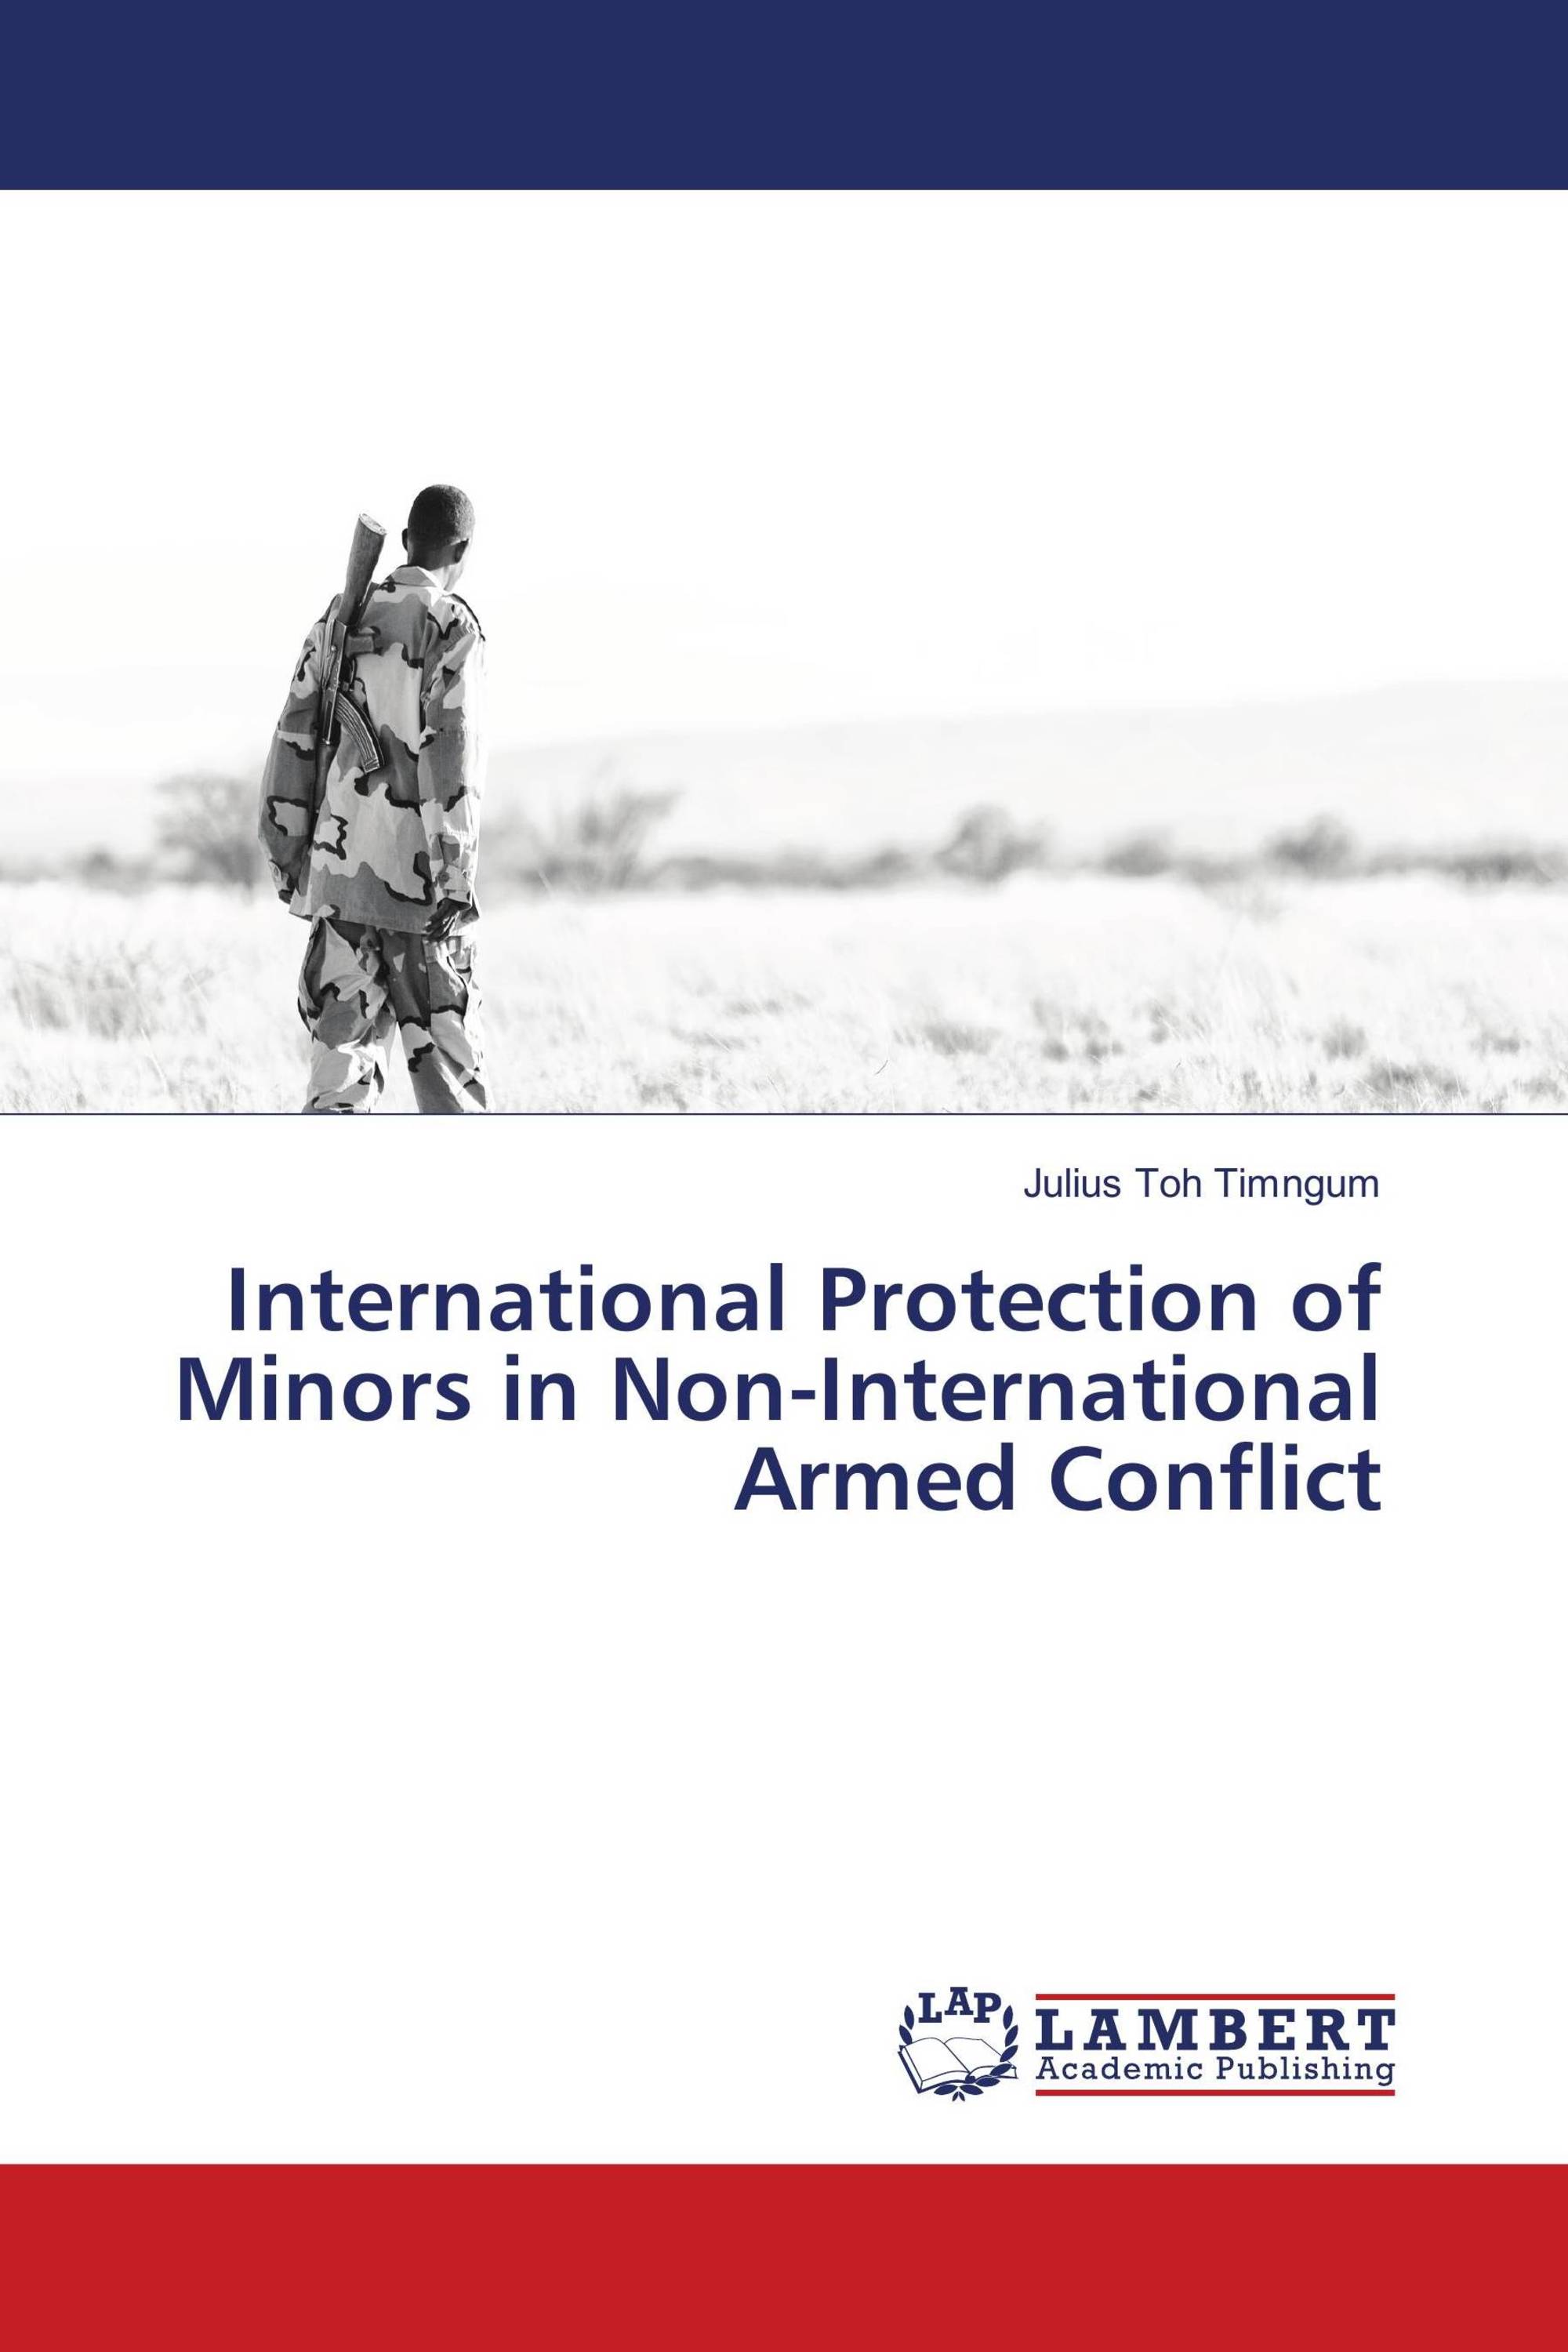 common article 3 relating to non-international armed conflict